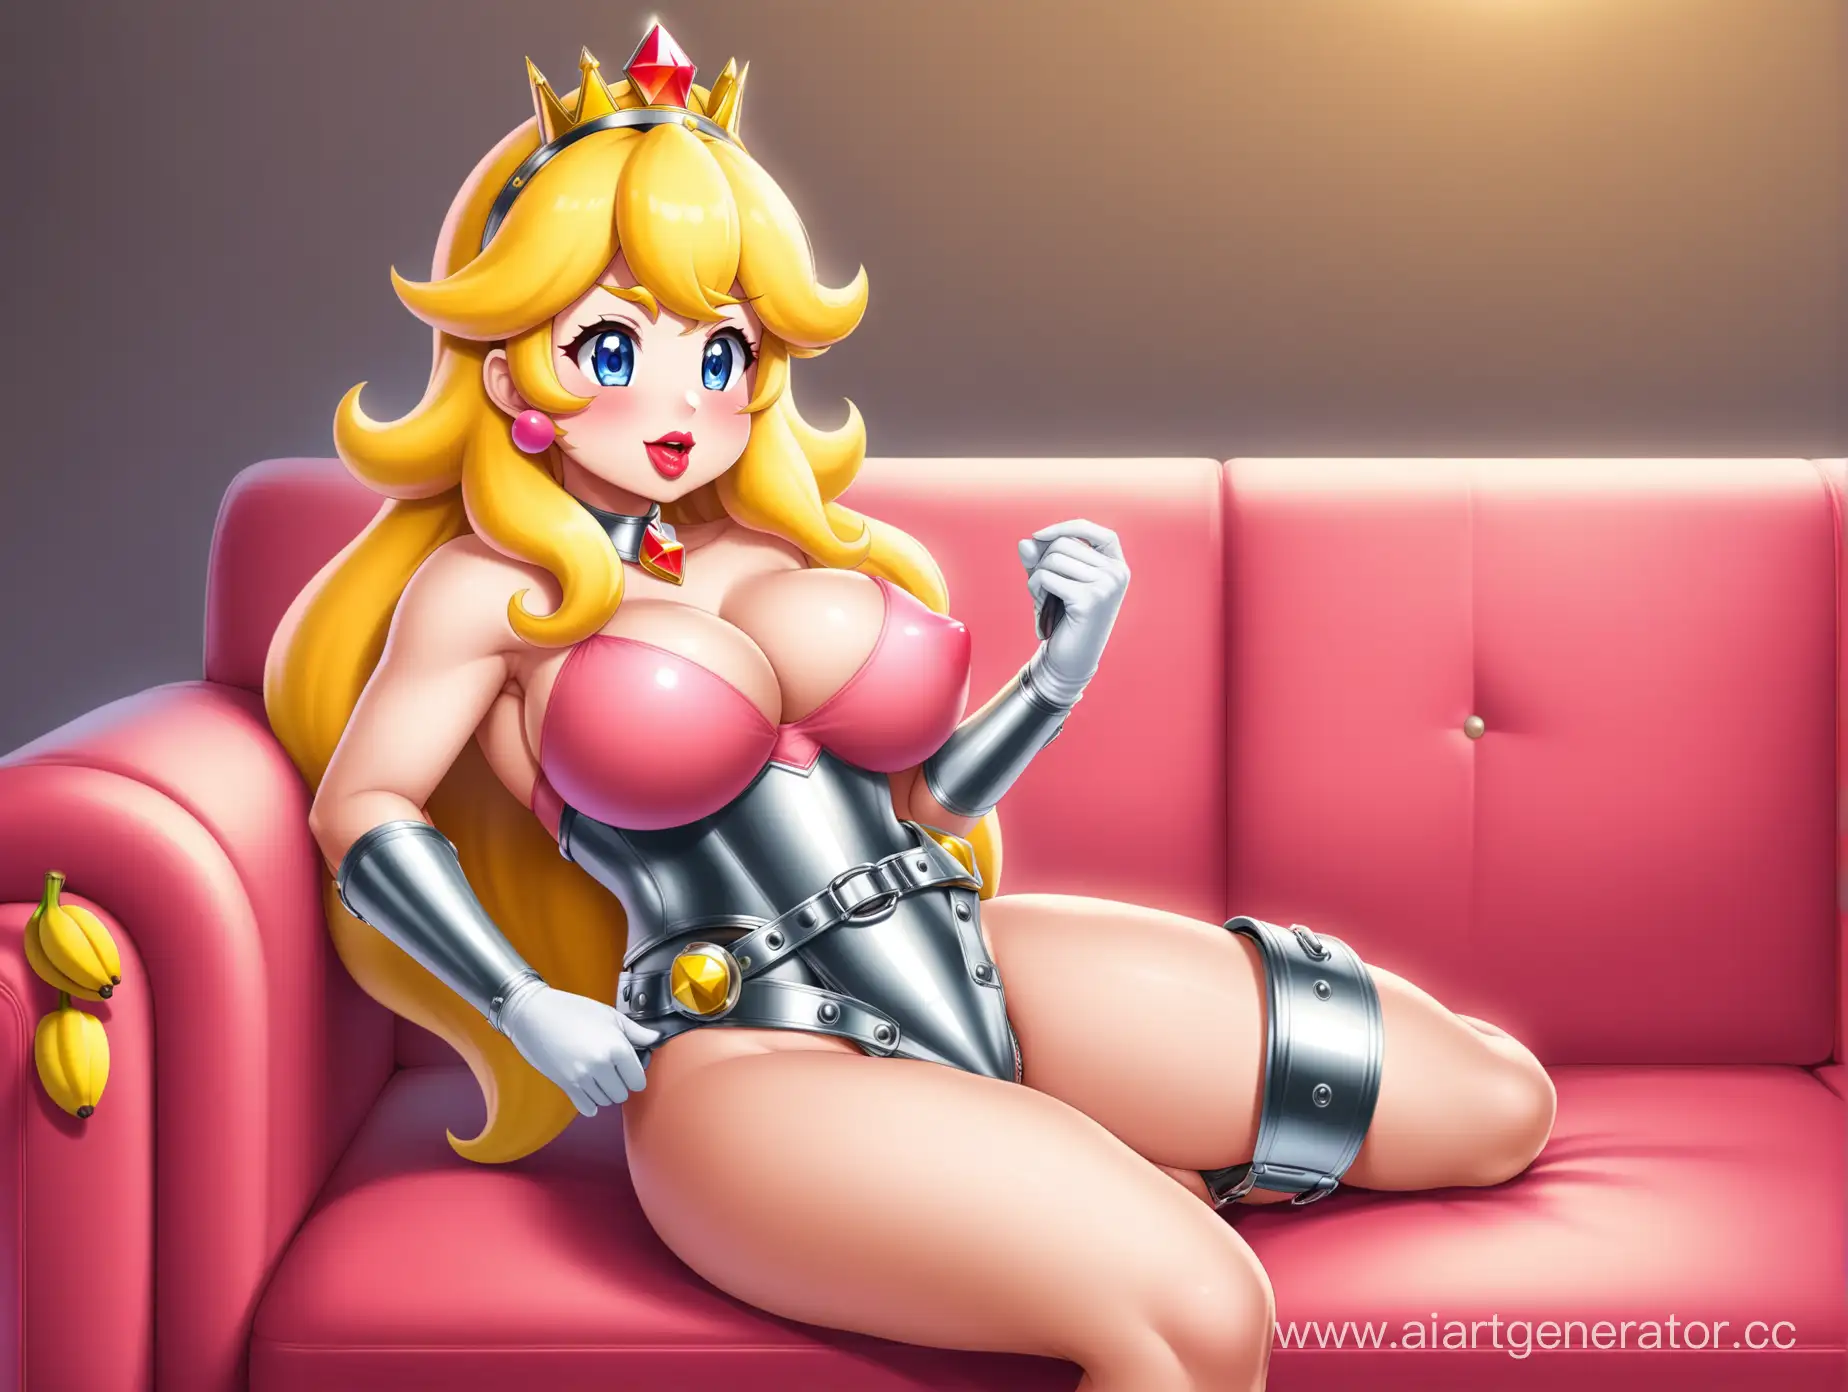 Princess-Peach-Enjoying-a-Banana-Snack-on-the-Couch